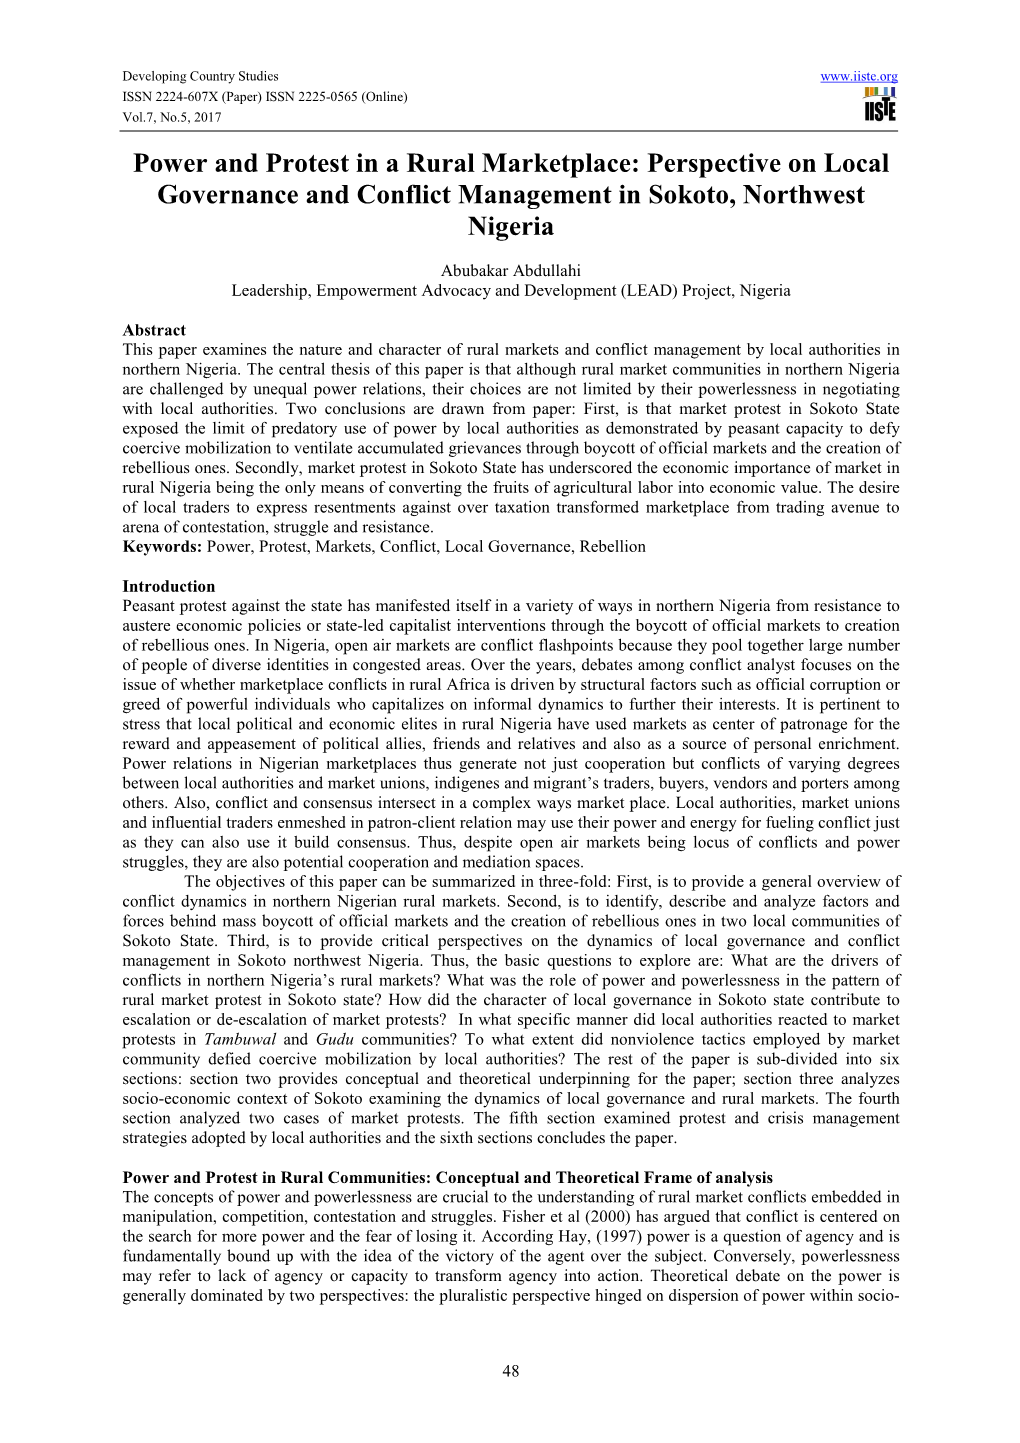 Power and Protest in a Rural Marketplace: Perspective on Local Governance and Conflict Management in Sokoto, Northwest Nigeria